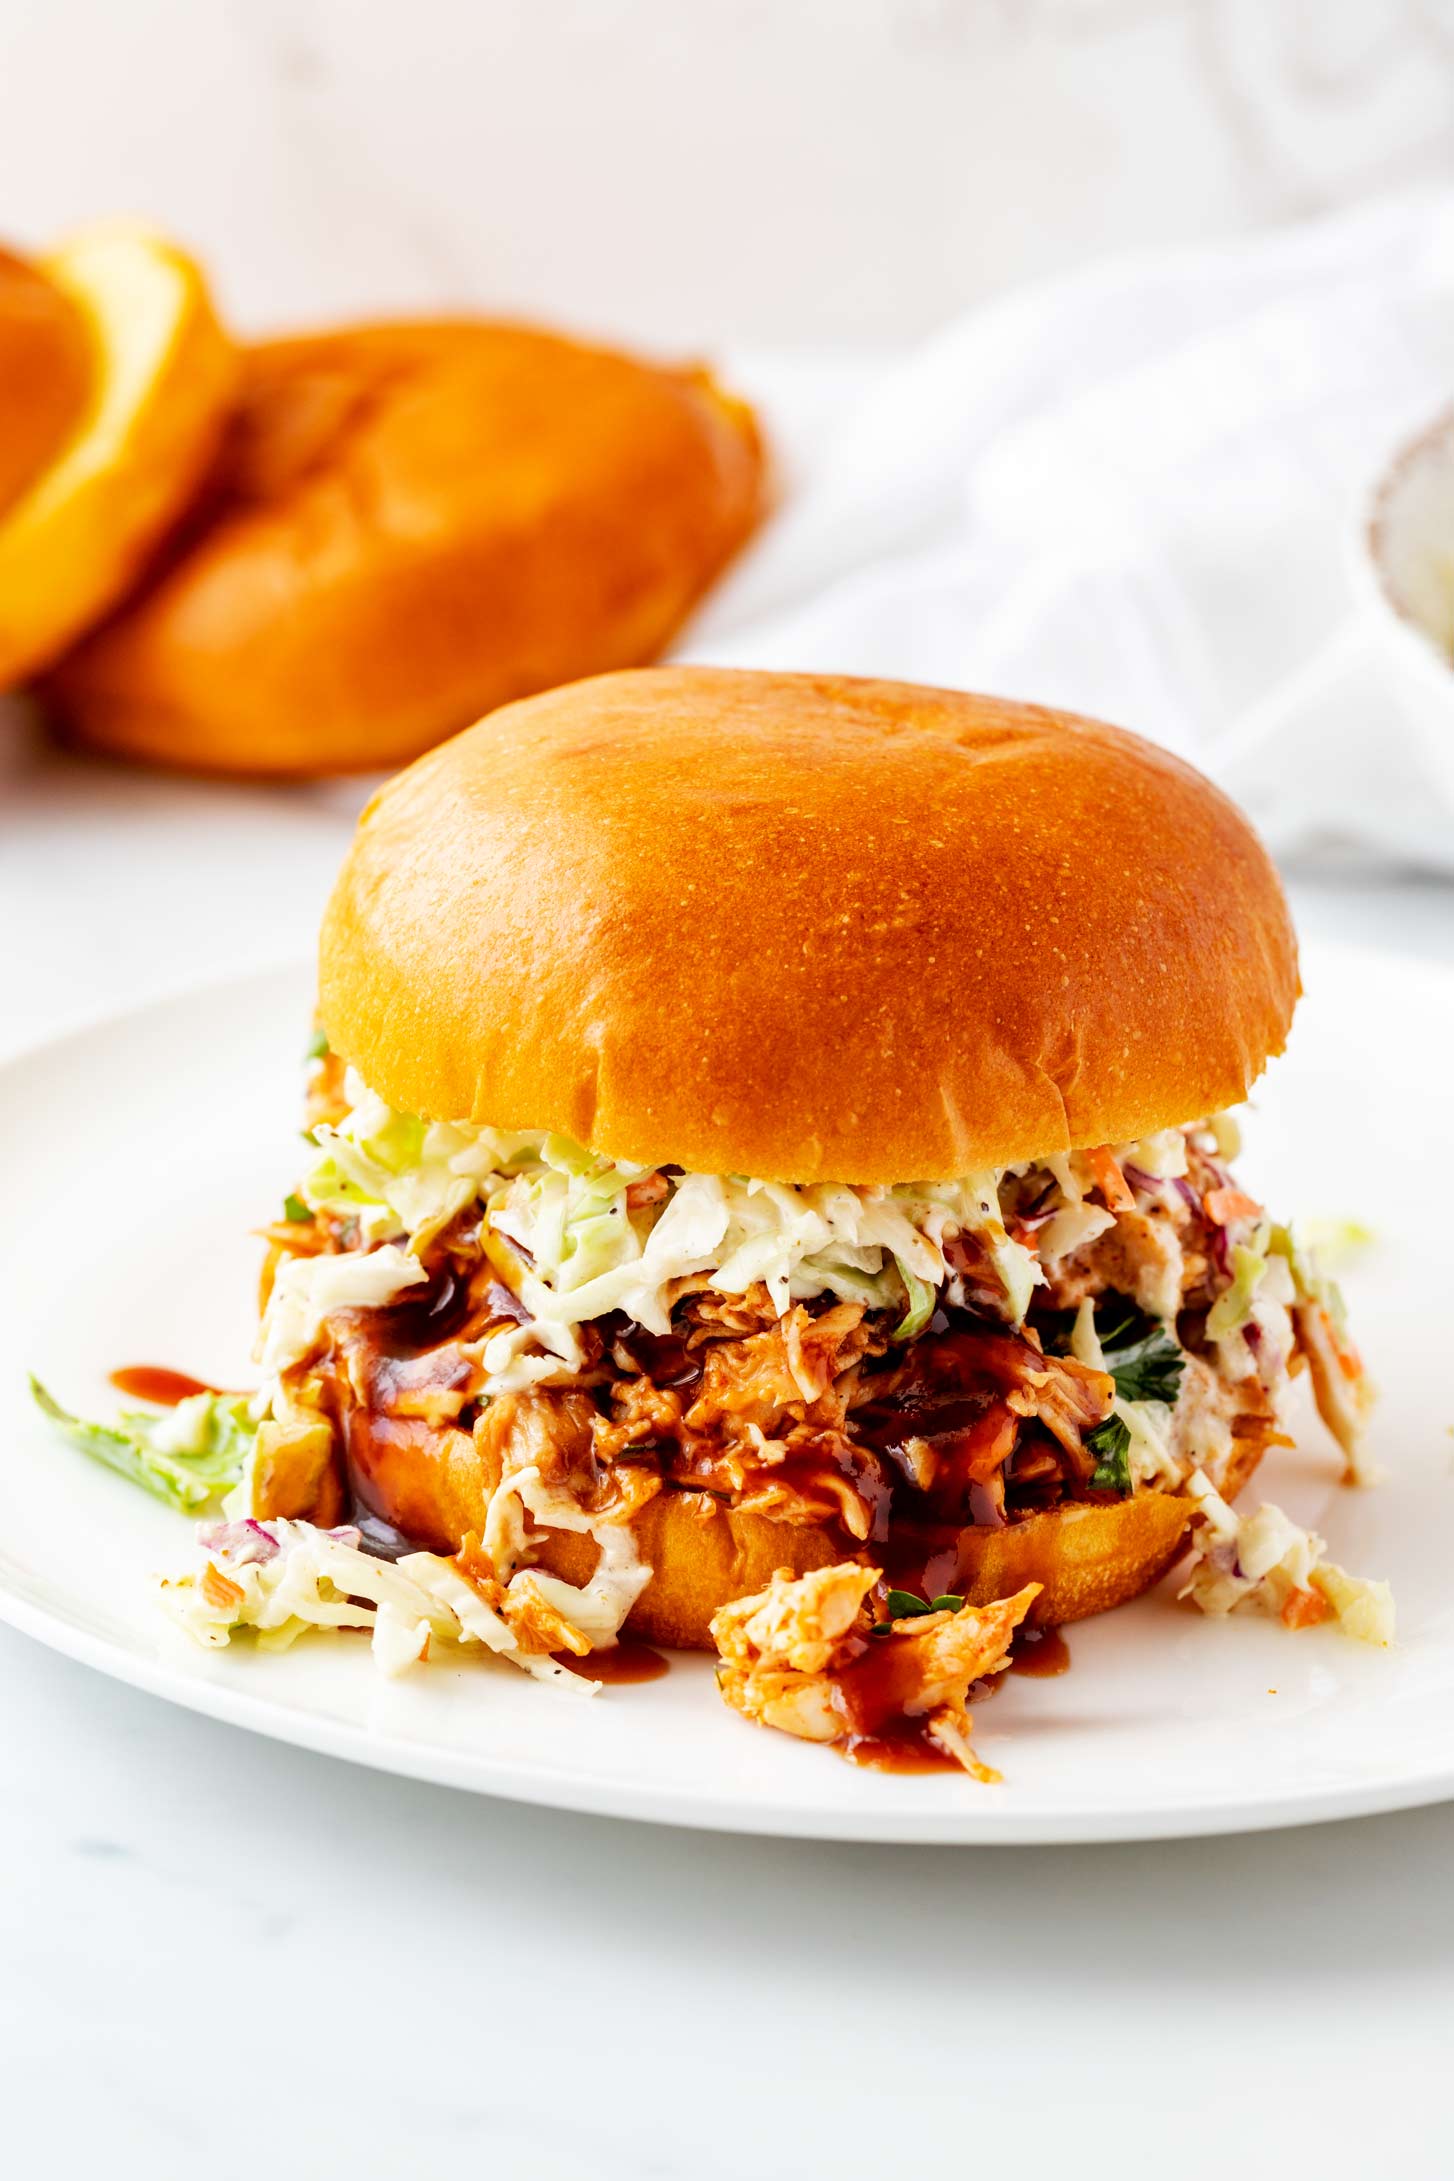 A BBQ Chicken sandwich with slaw on a white plate.